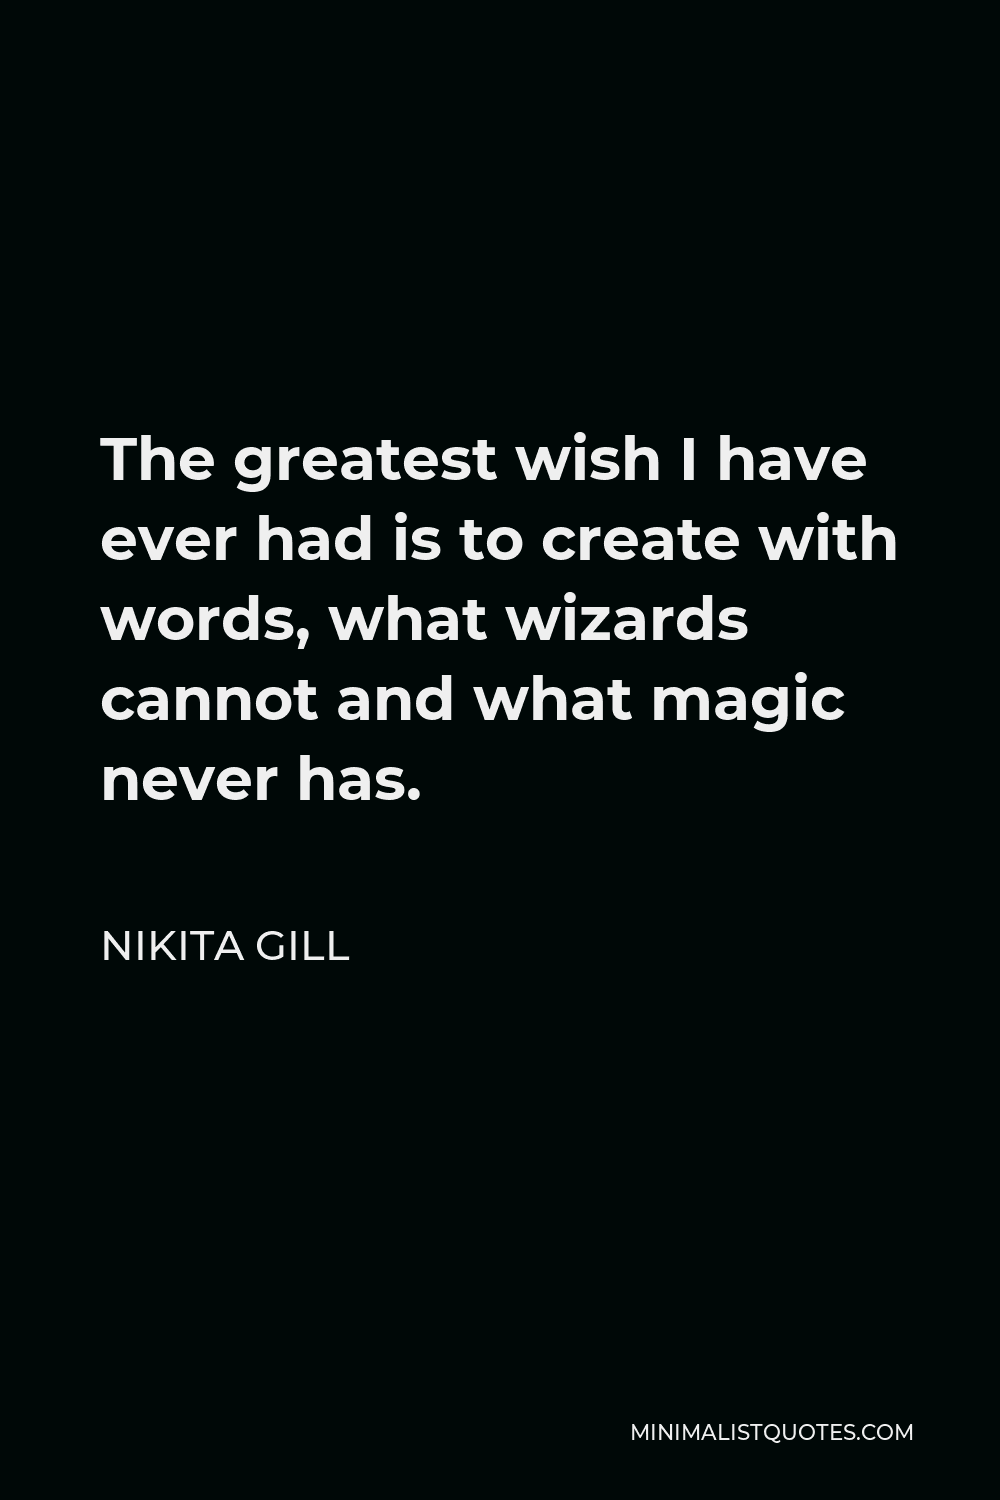 Nikita Gill Quote - The greatest wish I have ever had is to create with words, what wizards cannot and what magic never has.